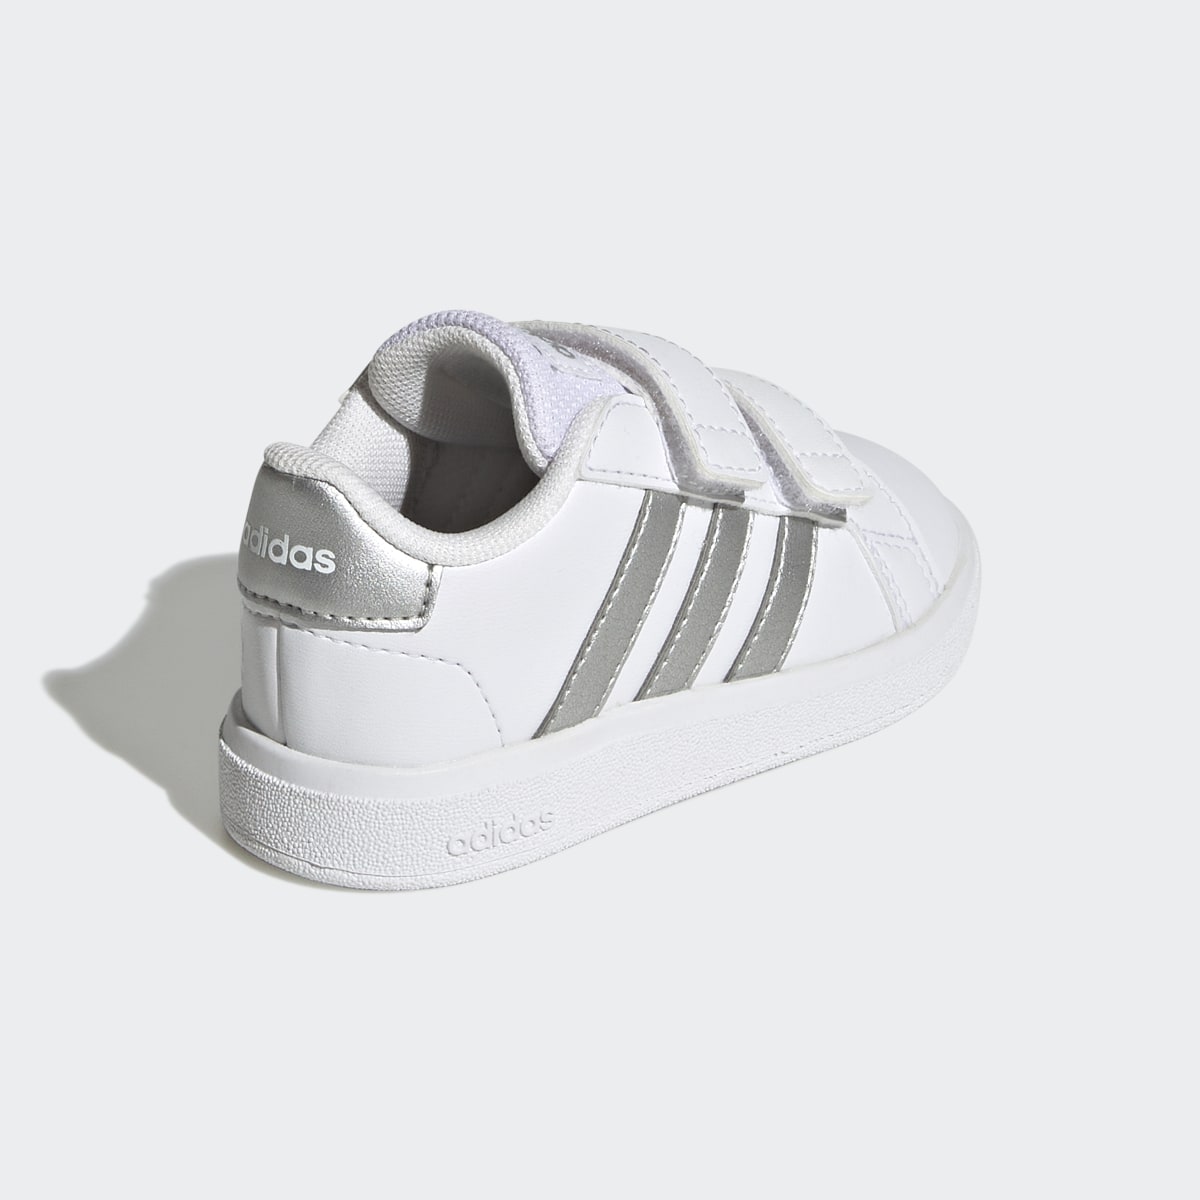 Adidas Grand Court Lifestyle Hook and Loop Shoes. 6